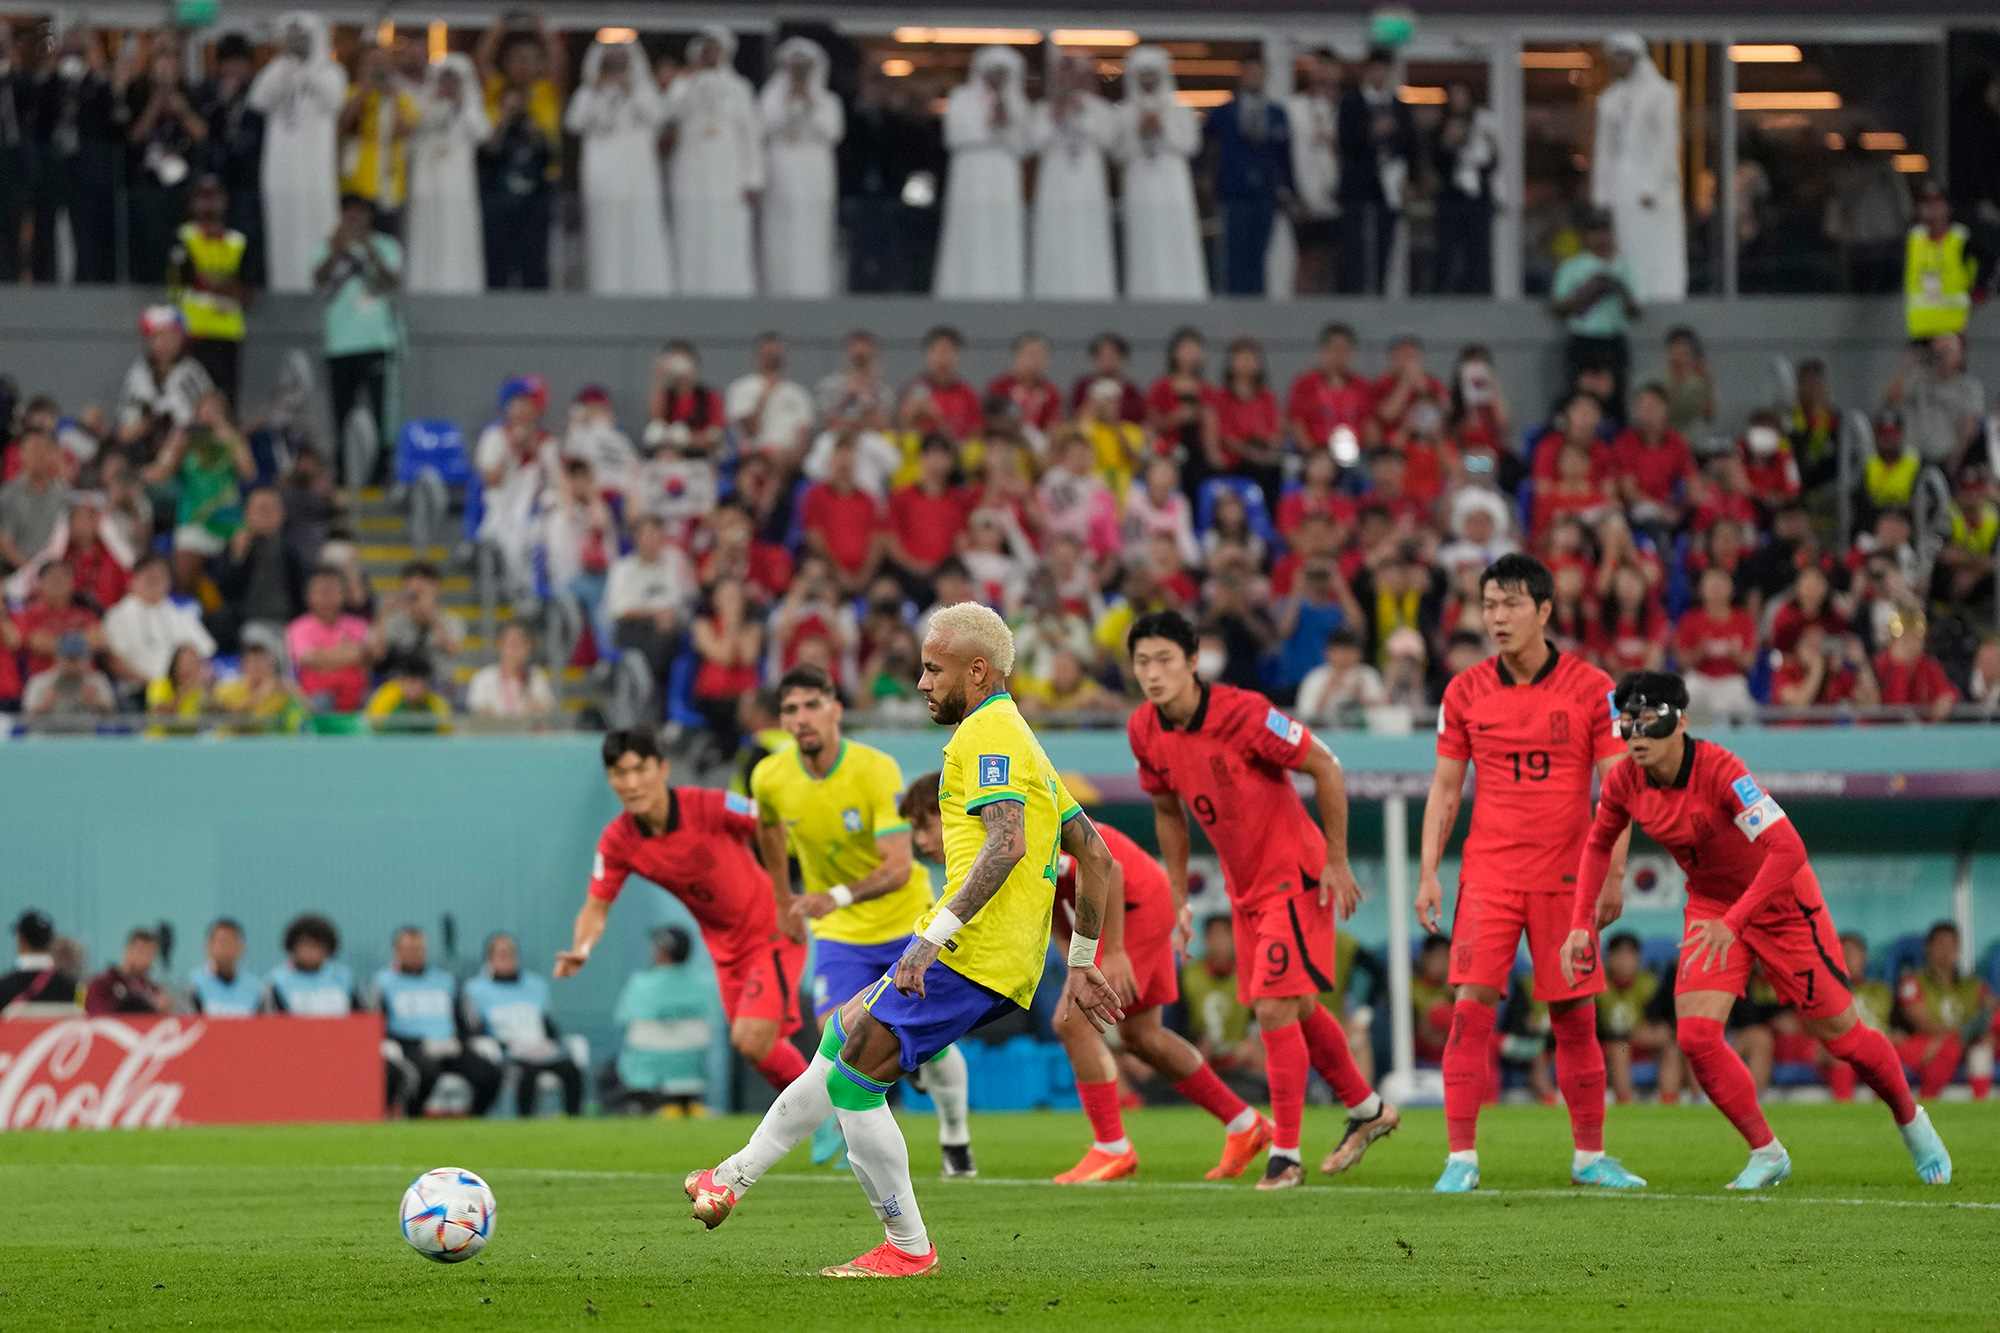 Brazil's Neymar scores his side's second goal with a penalty kick.